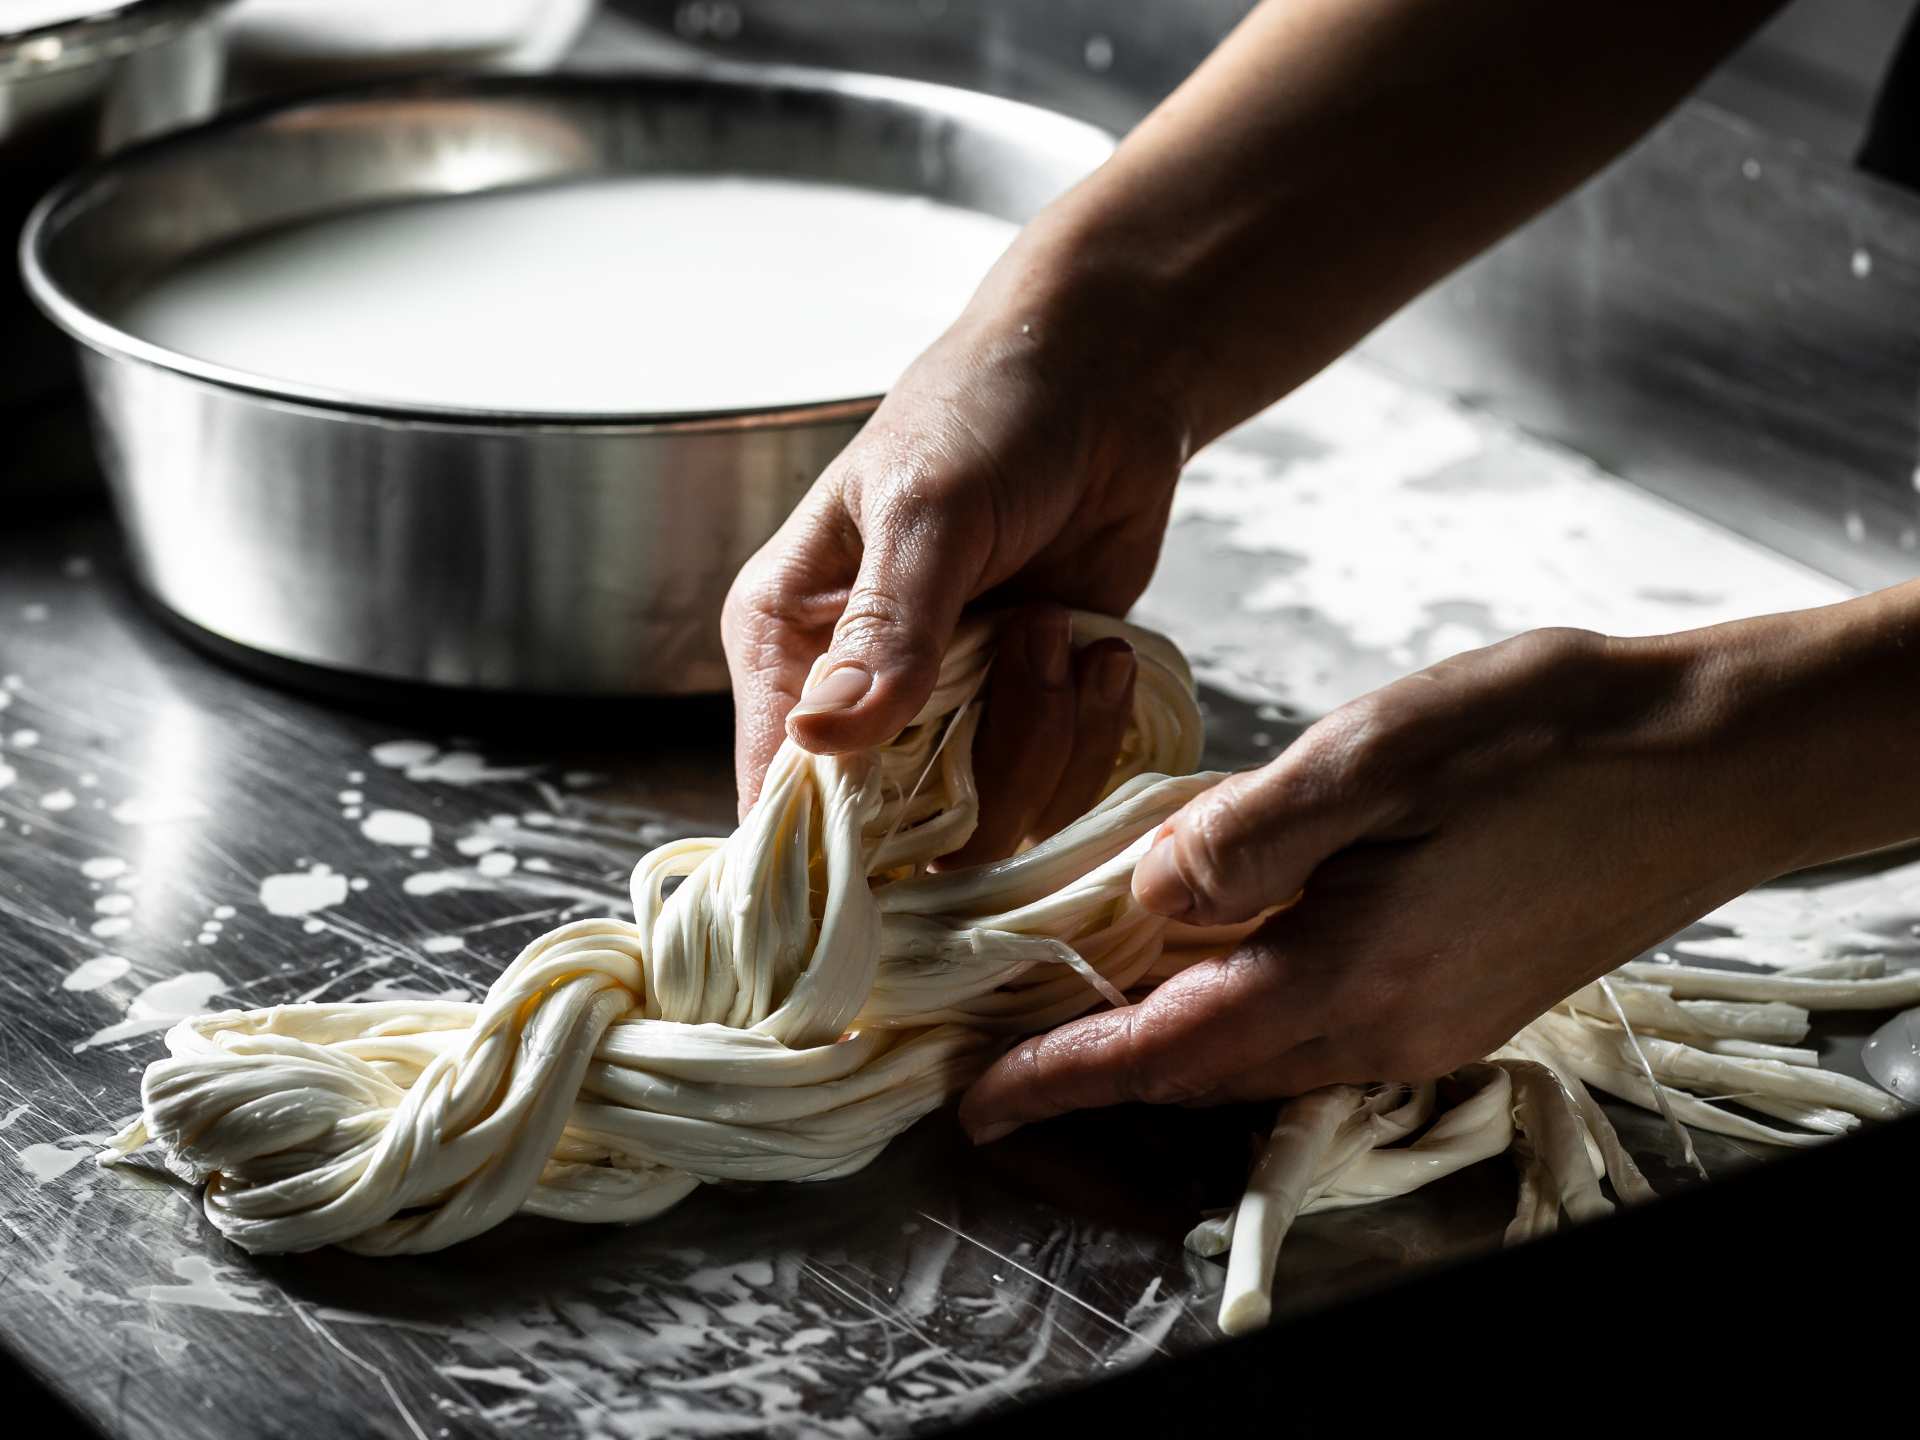 Stretching a pasta filata cheese by hand